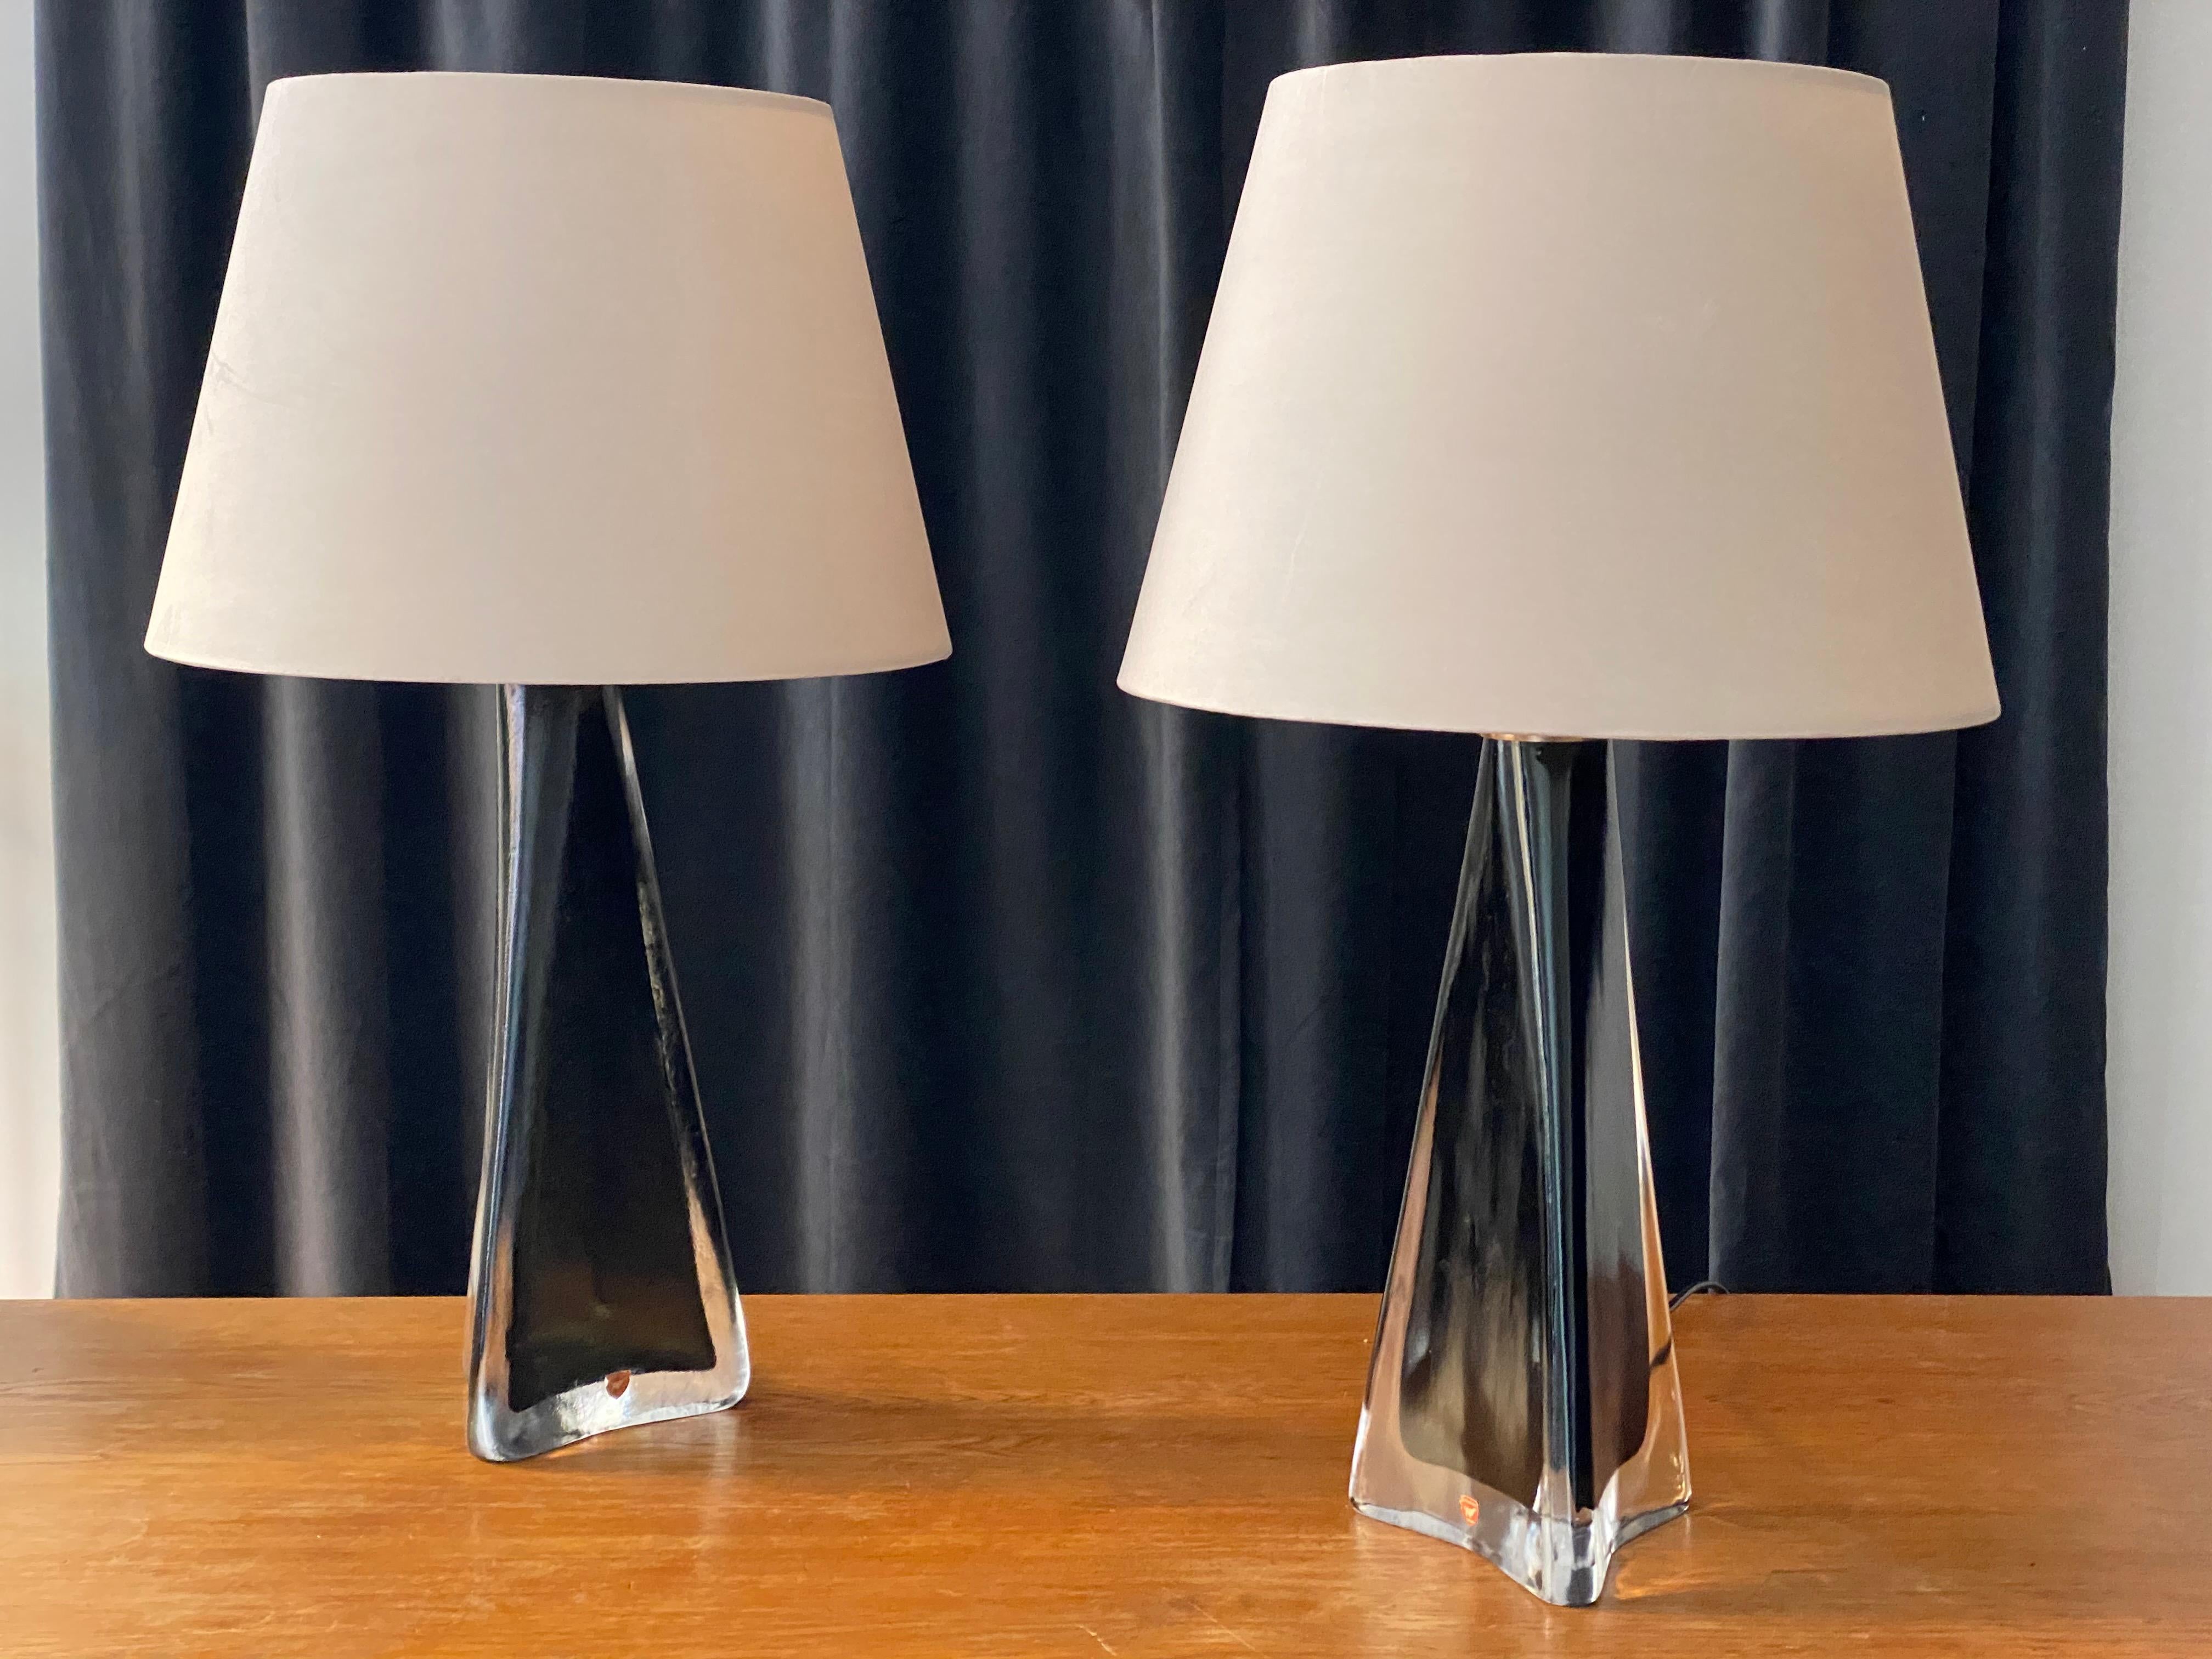 A pair of sizable table lamps designed by Carl Fagerlund for Orrefors, where he served as a lighting designer from 1946-1980. Label indicating the lamps are executed in lead glass. Partially black-stained. Sold without lampshades.

In addition to